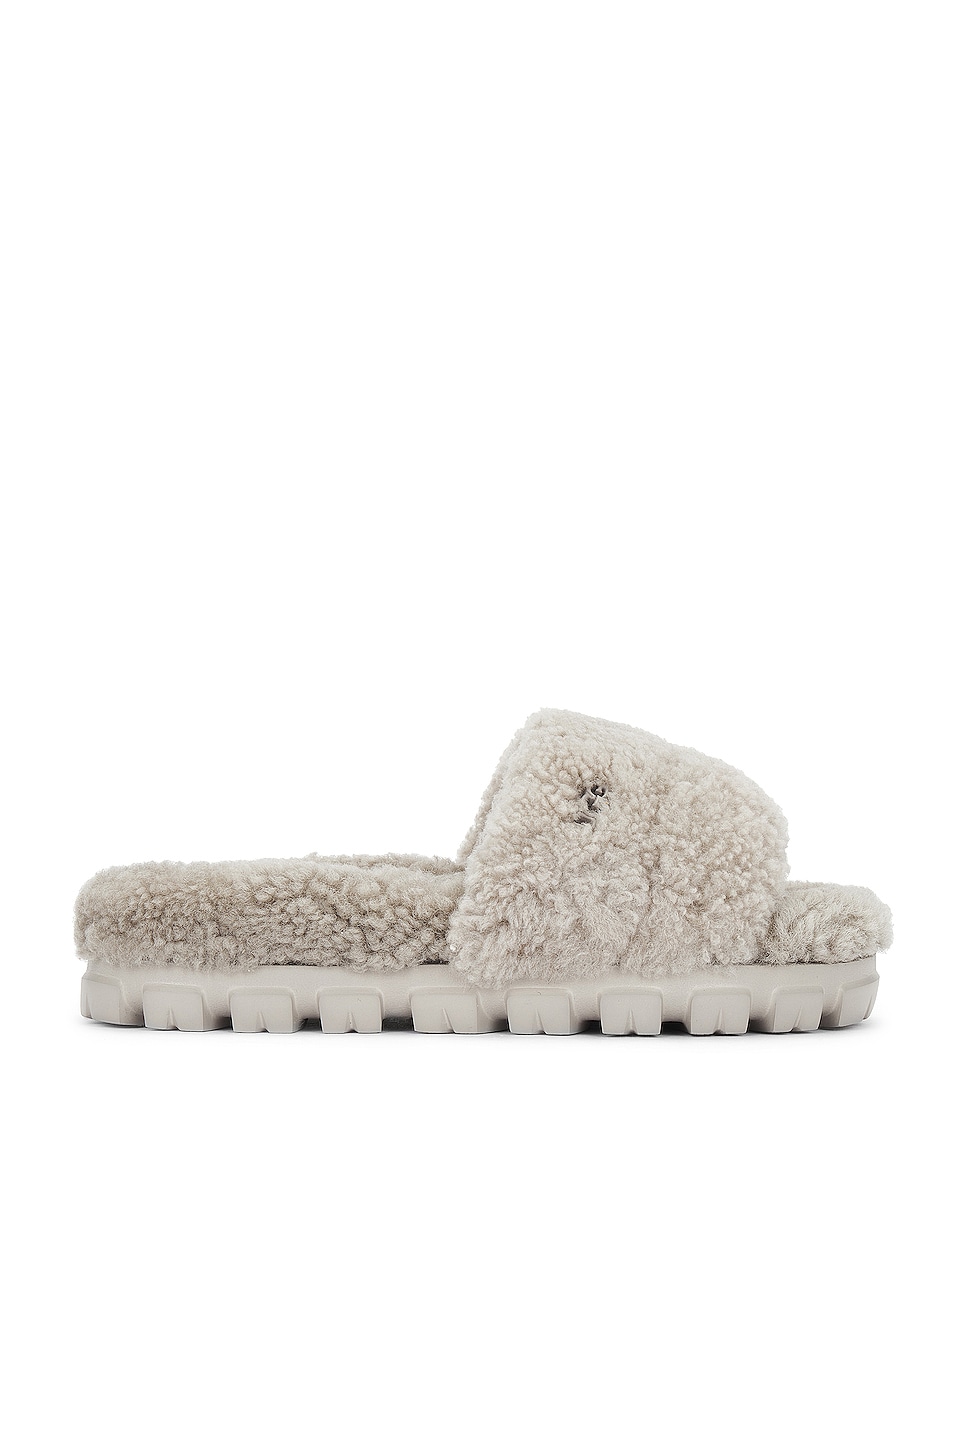 Image 1 of UGG Cozetta Curly Slipper in Goat